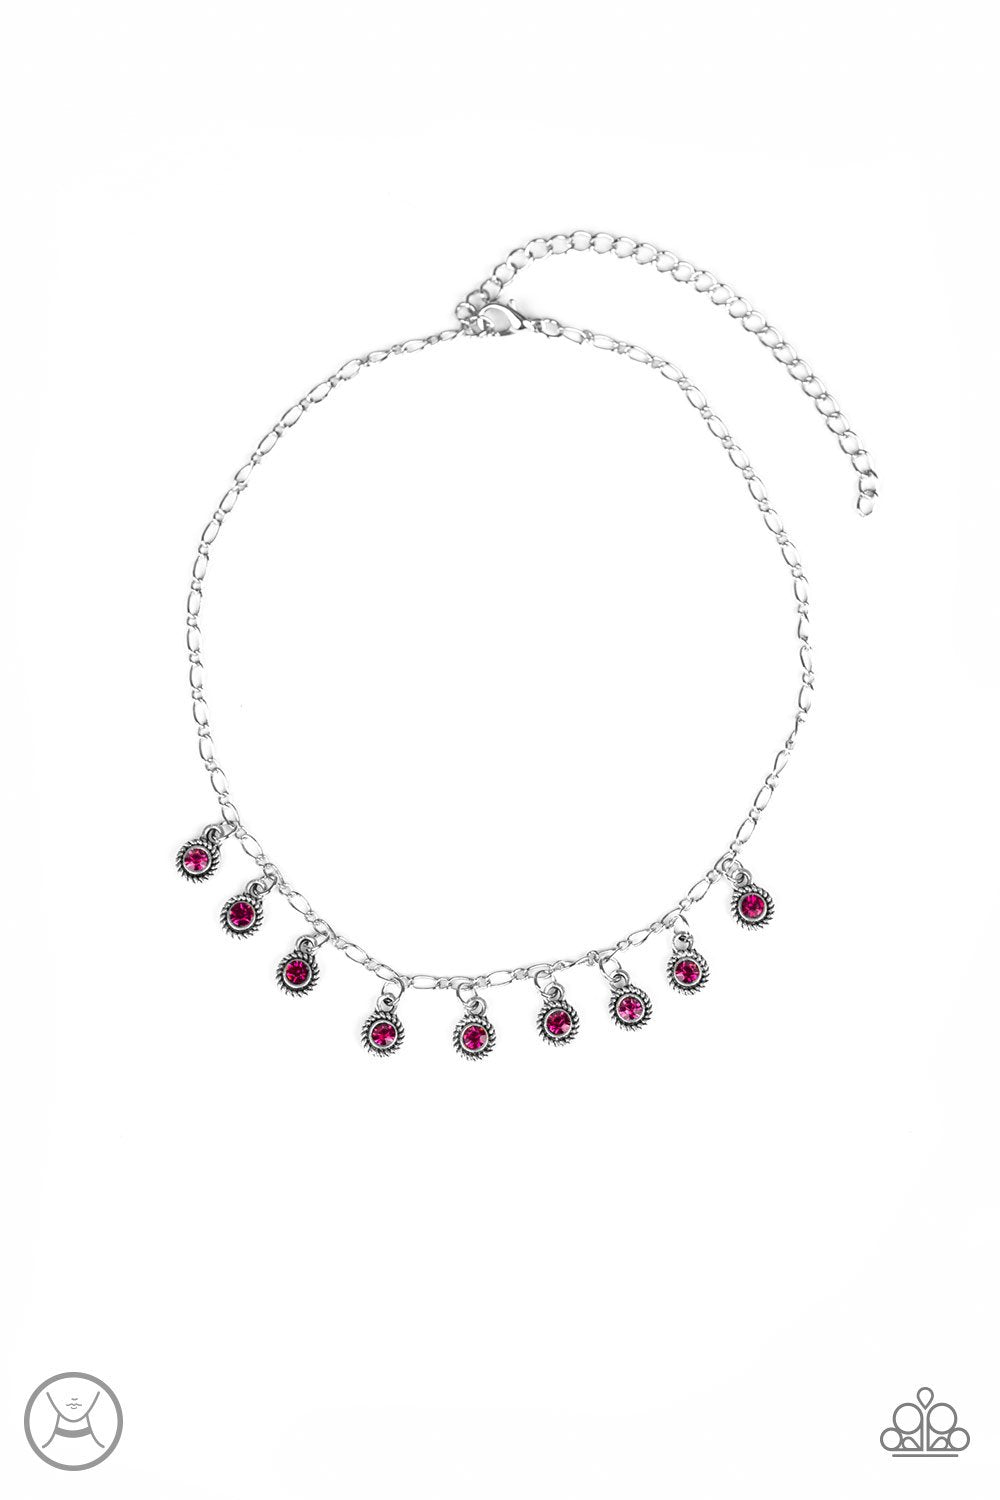 Popstar Party Pink Choker Necklace - Paparazzi Accessories-CarasShop.com - $5 Jewelry by Cara Jewels